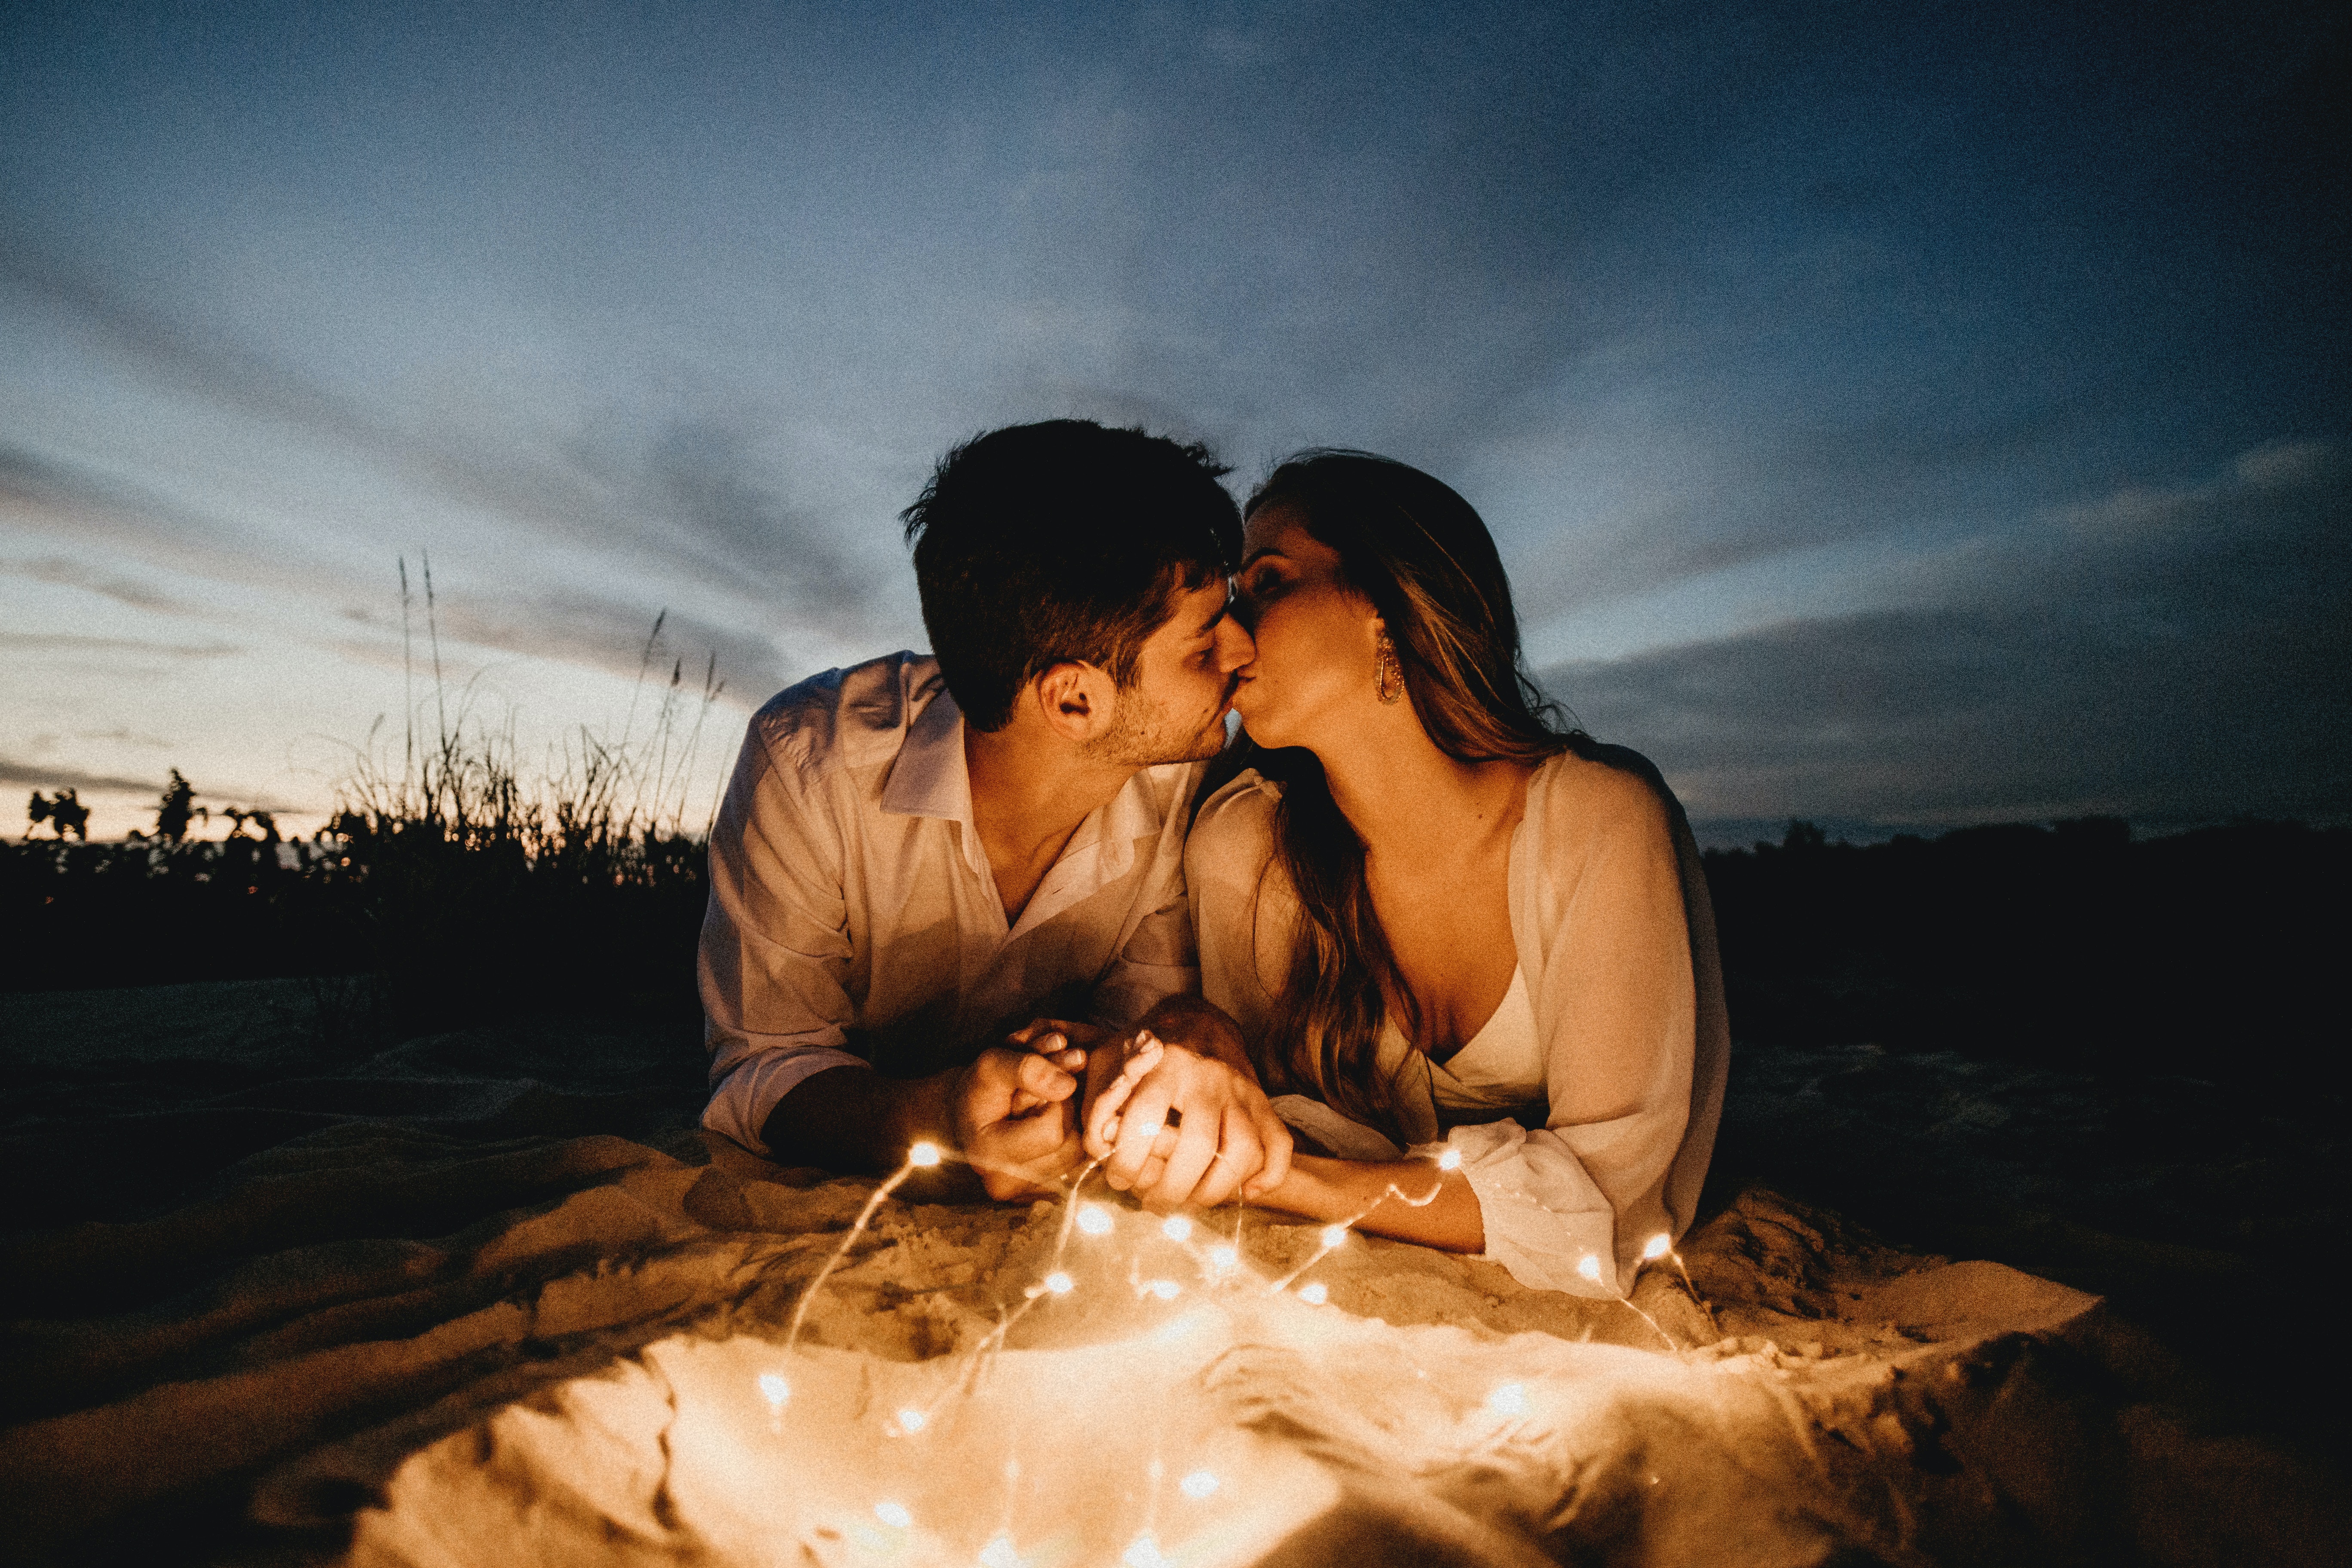 A photo of a couple kissing at nighttime  | Source: Unsplash